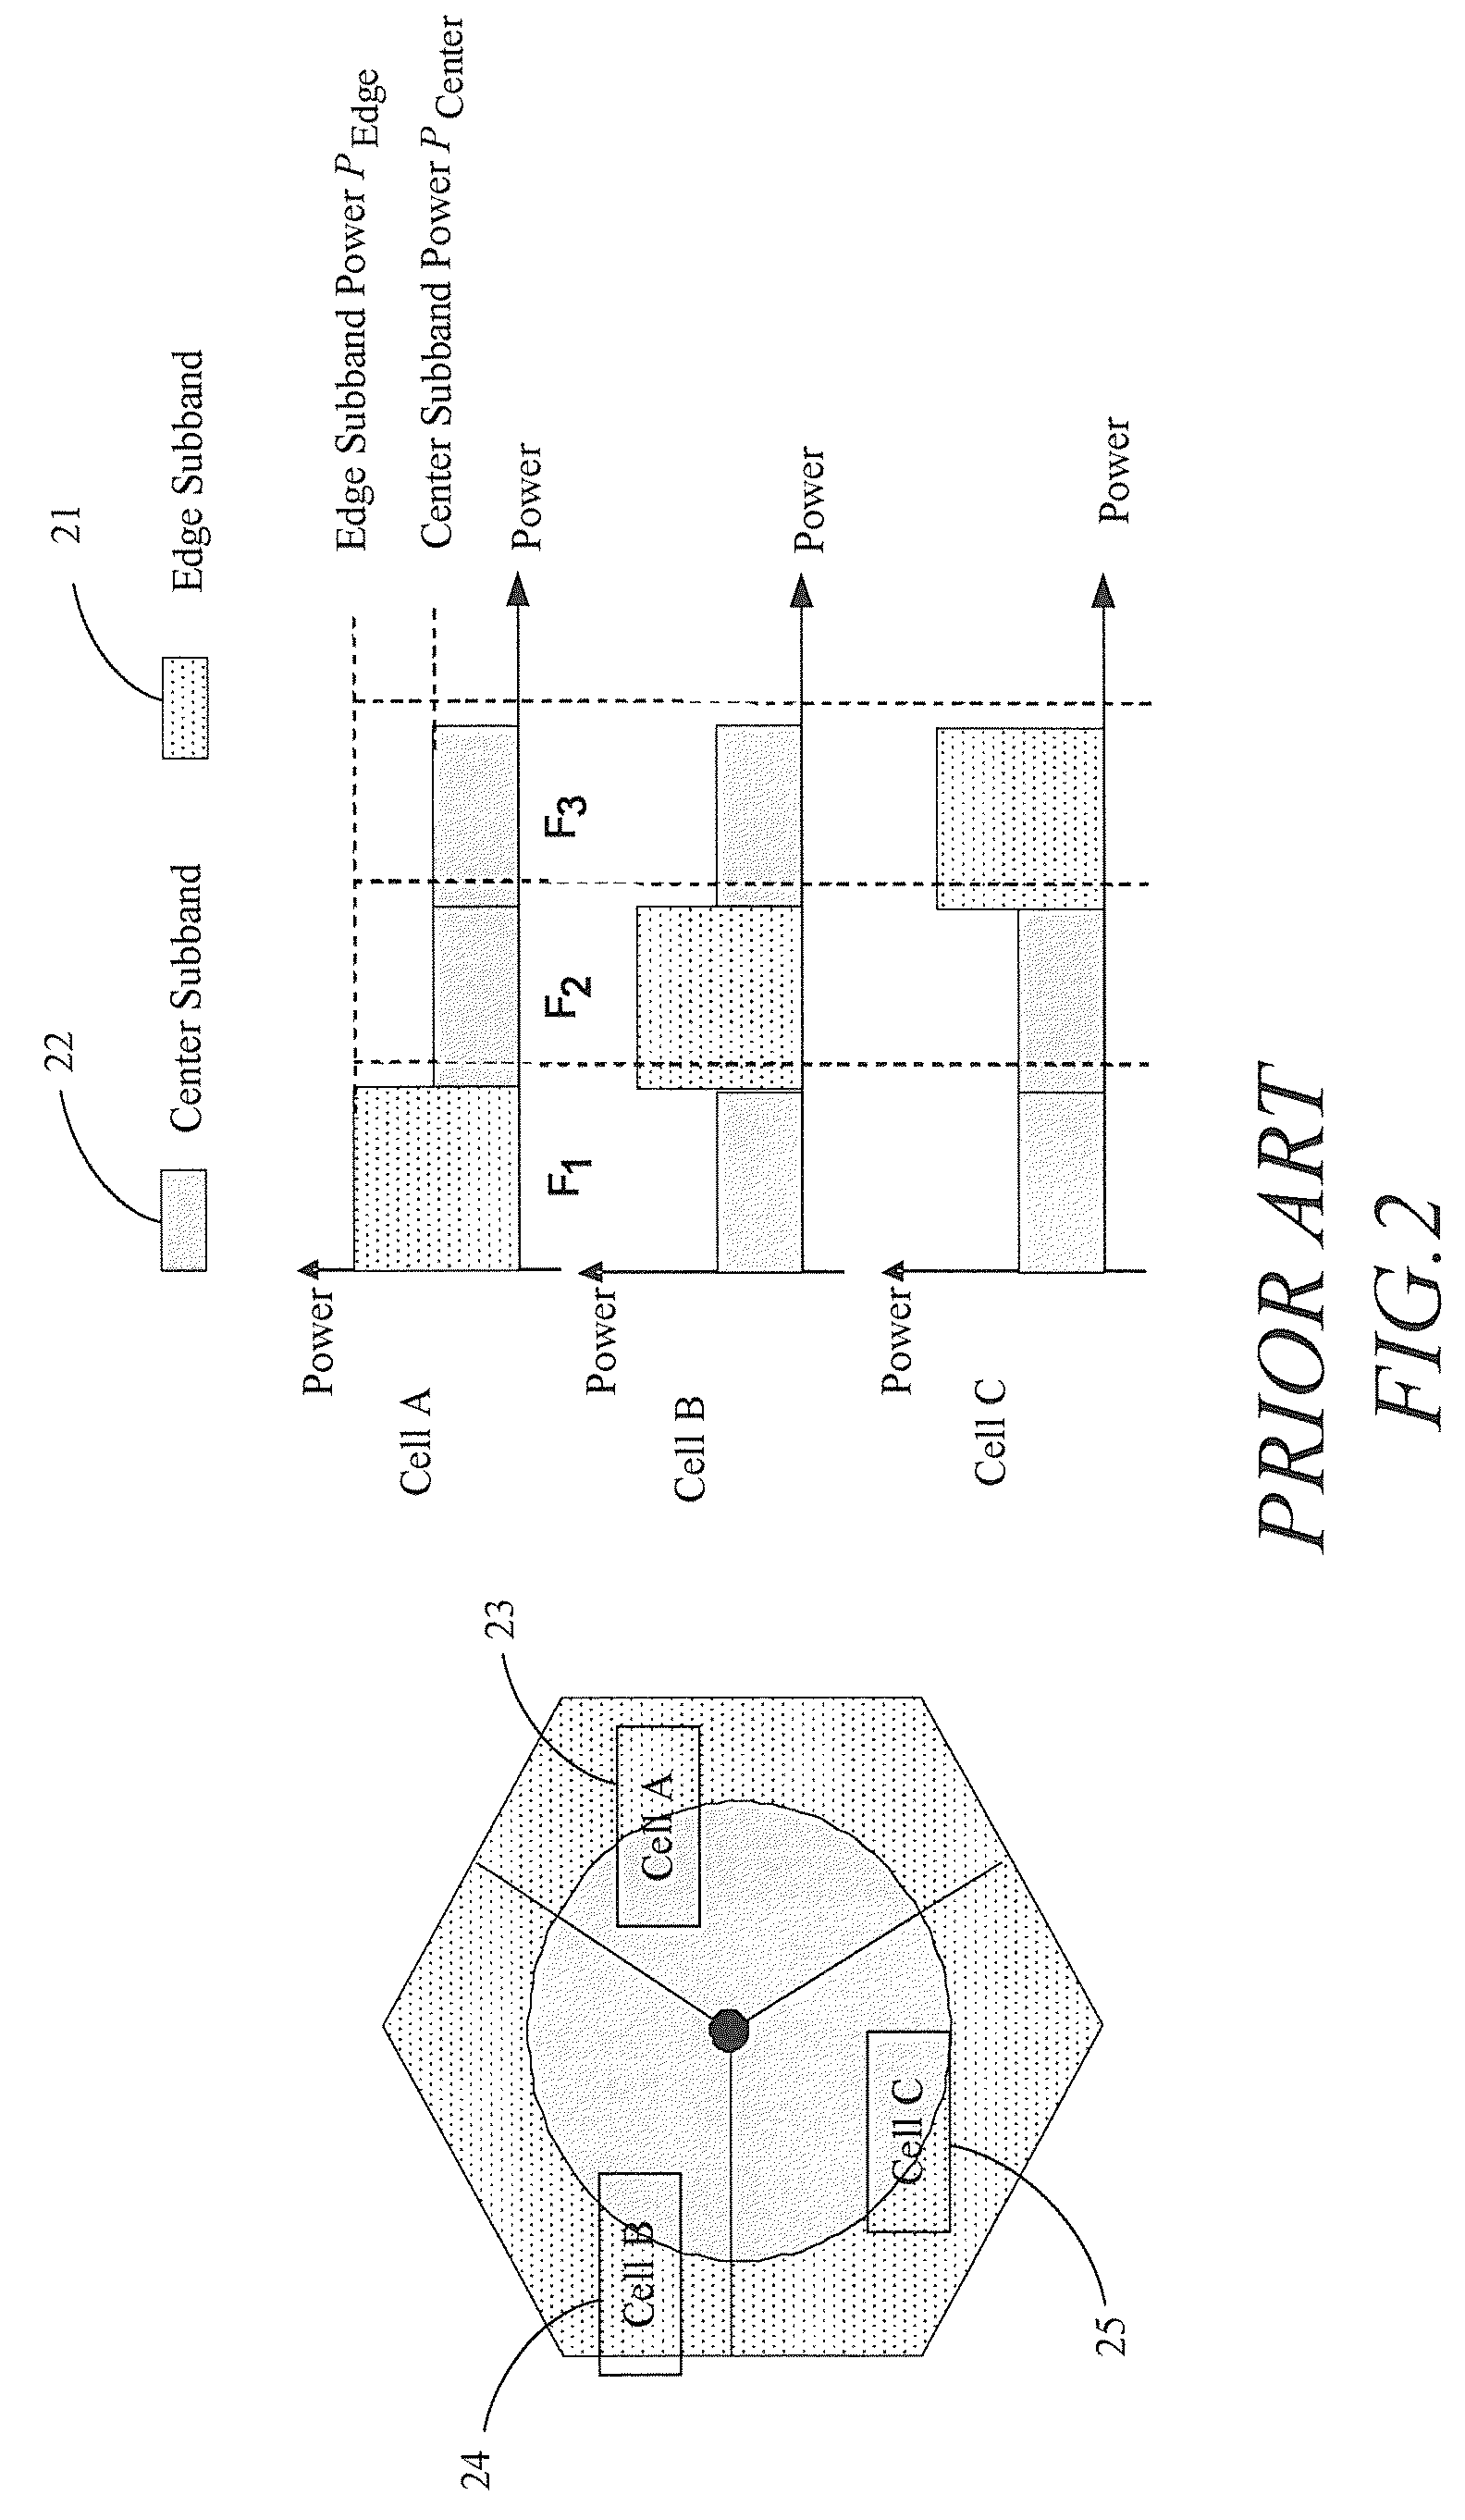 User grouping method for inter-cell interference coordination in mobile telecommunication